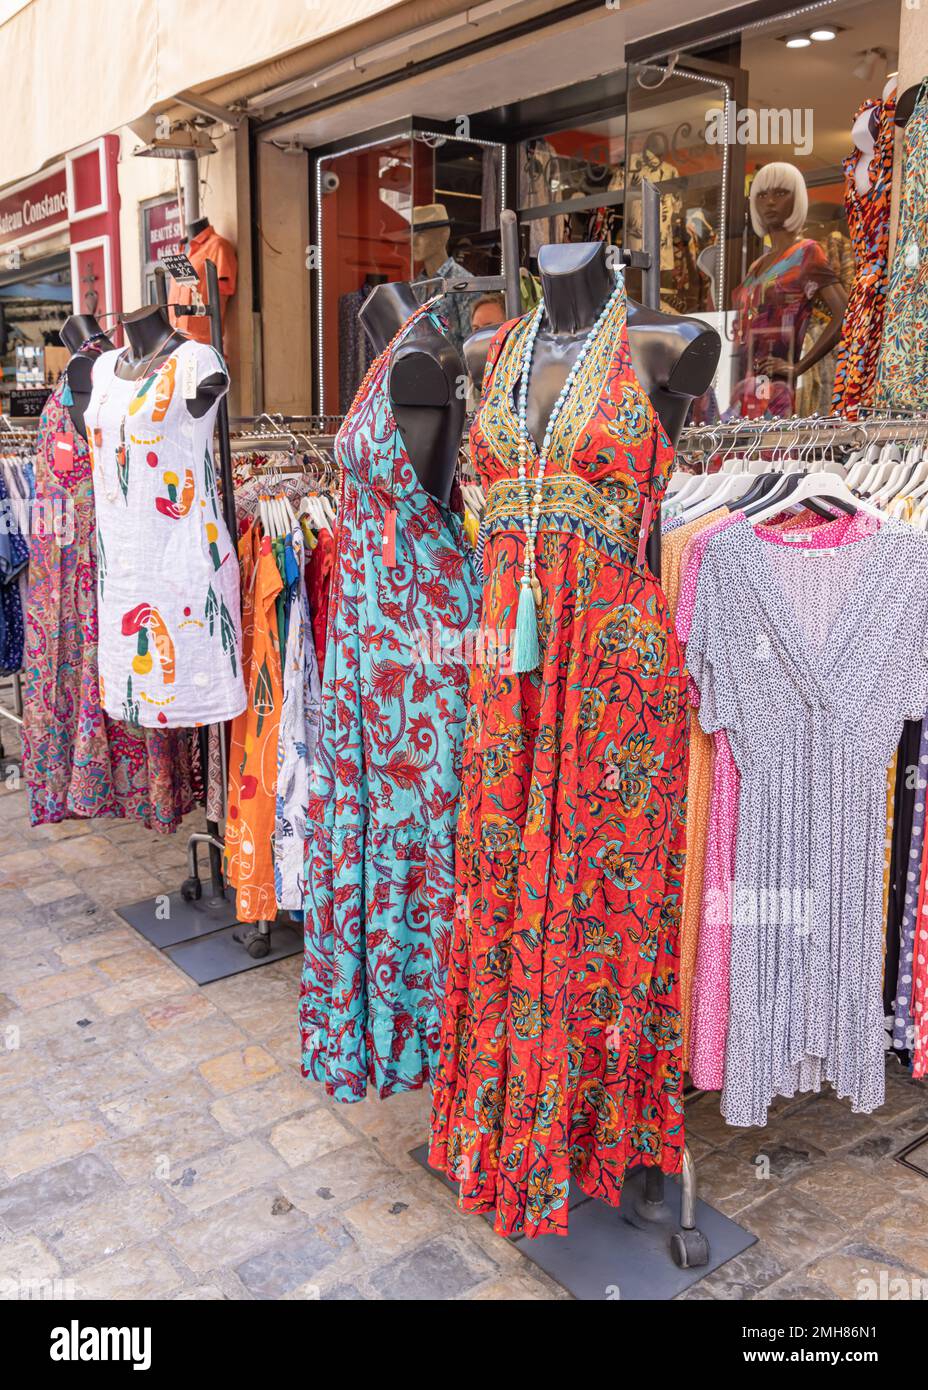 Aigues-Mortes, Gard, Occitania, France. July 4, 2022. Women's clothing for  sale outside a shop in southern France Stock Photo - Alamy